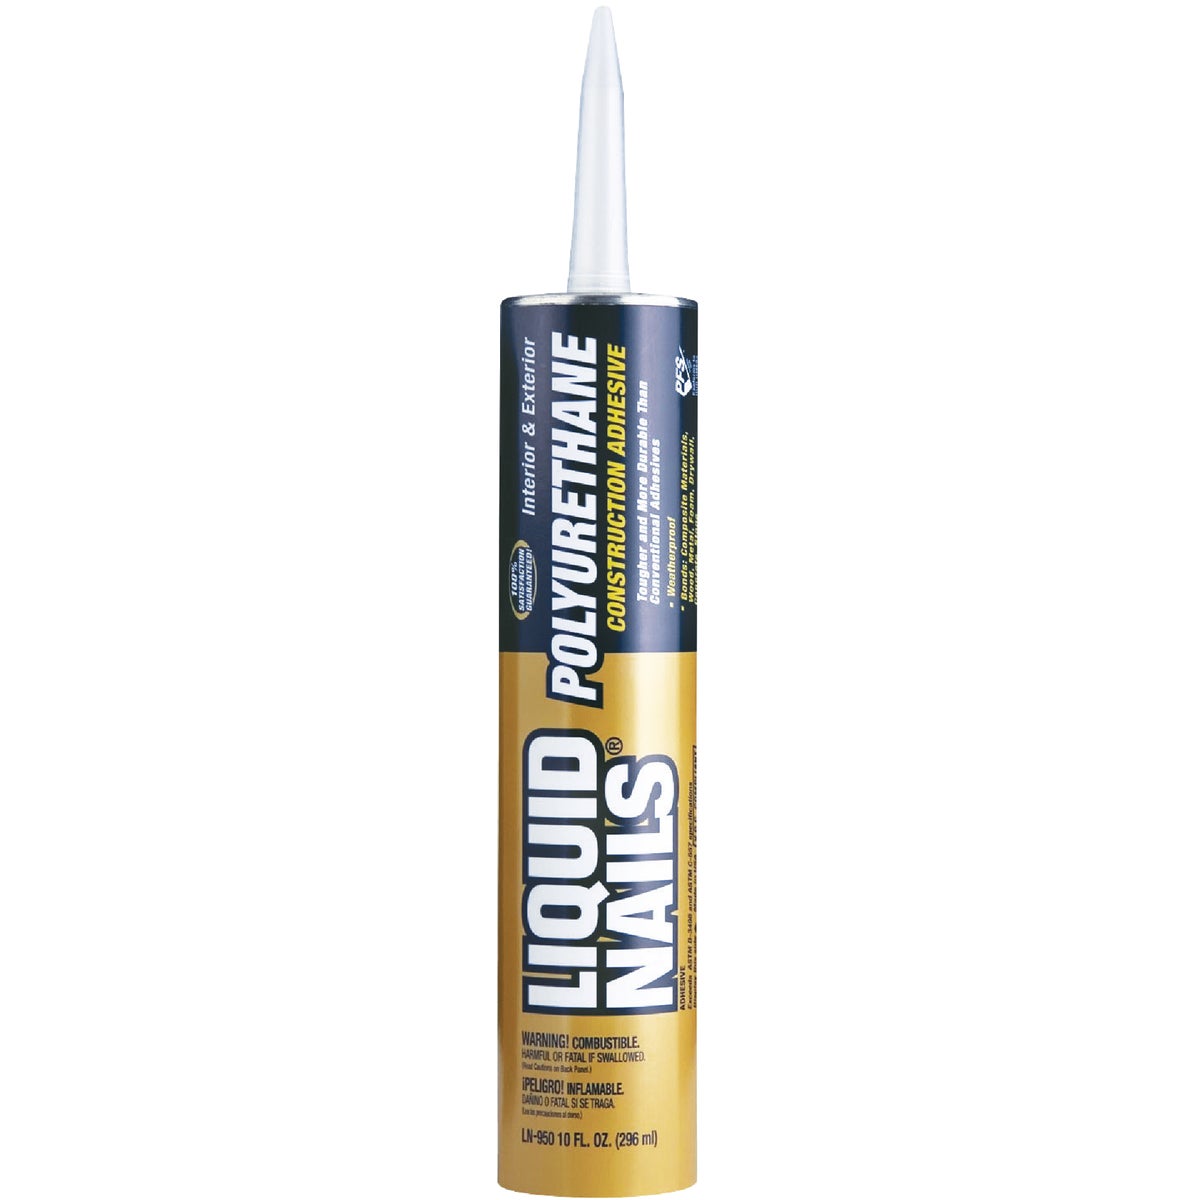 Item 265929, An excellent, VOC polyurethane adhesive specially formulated to adhere to 